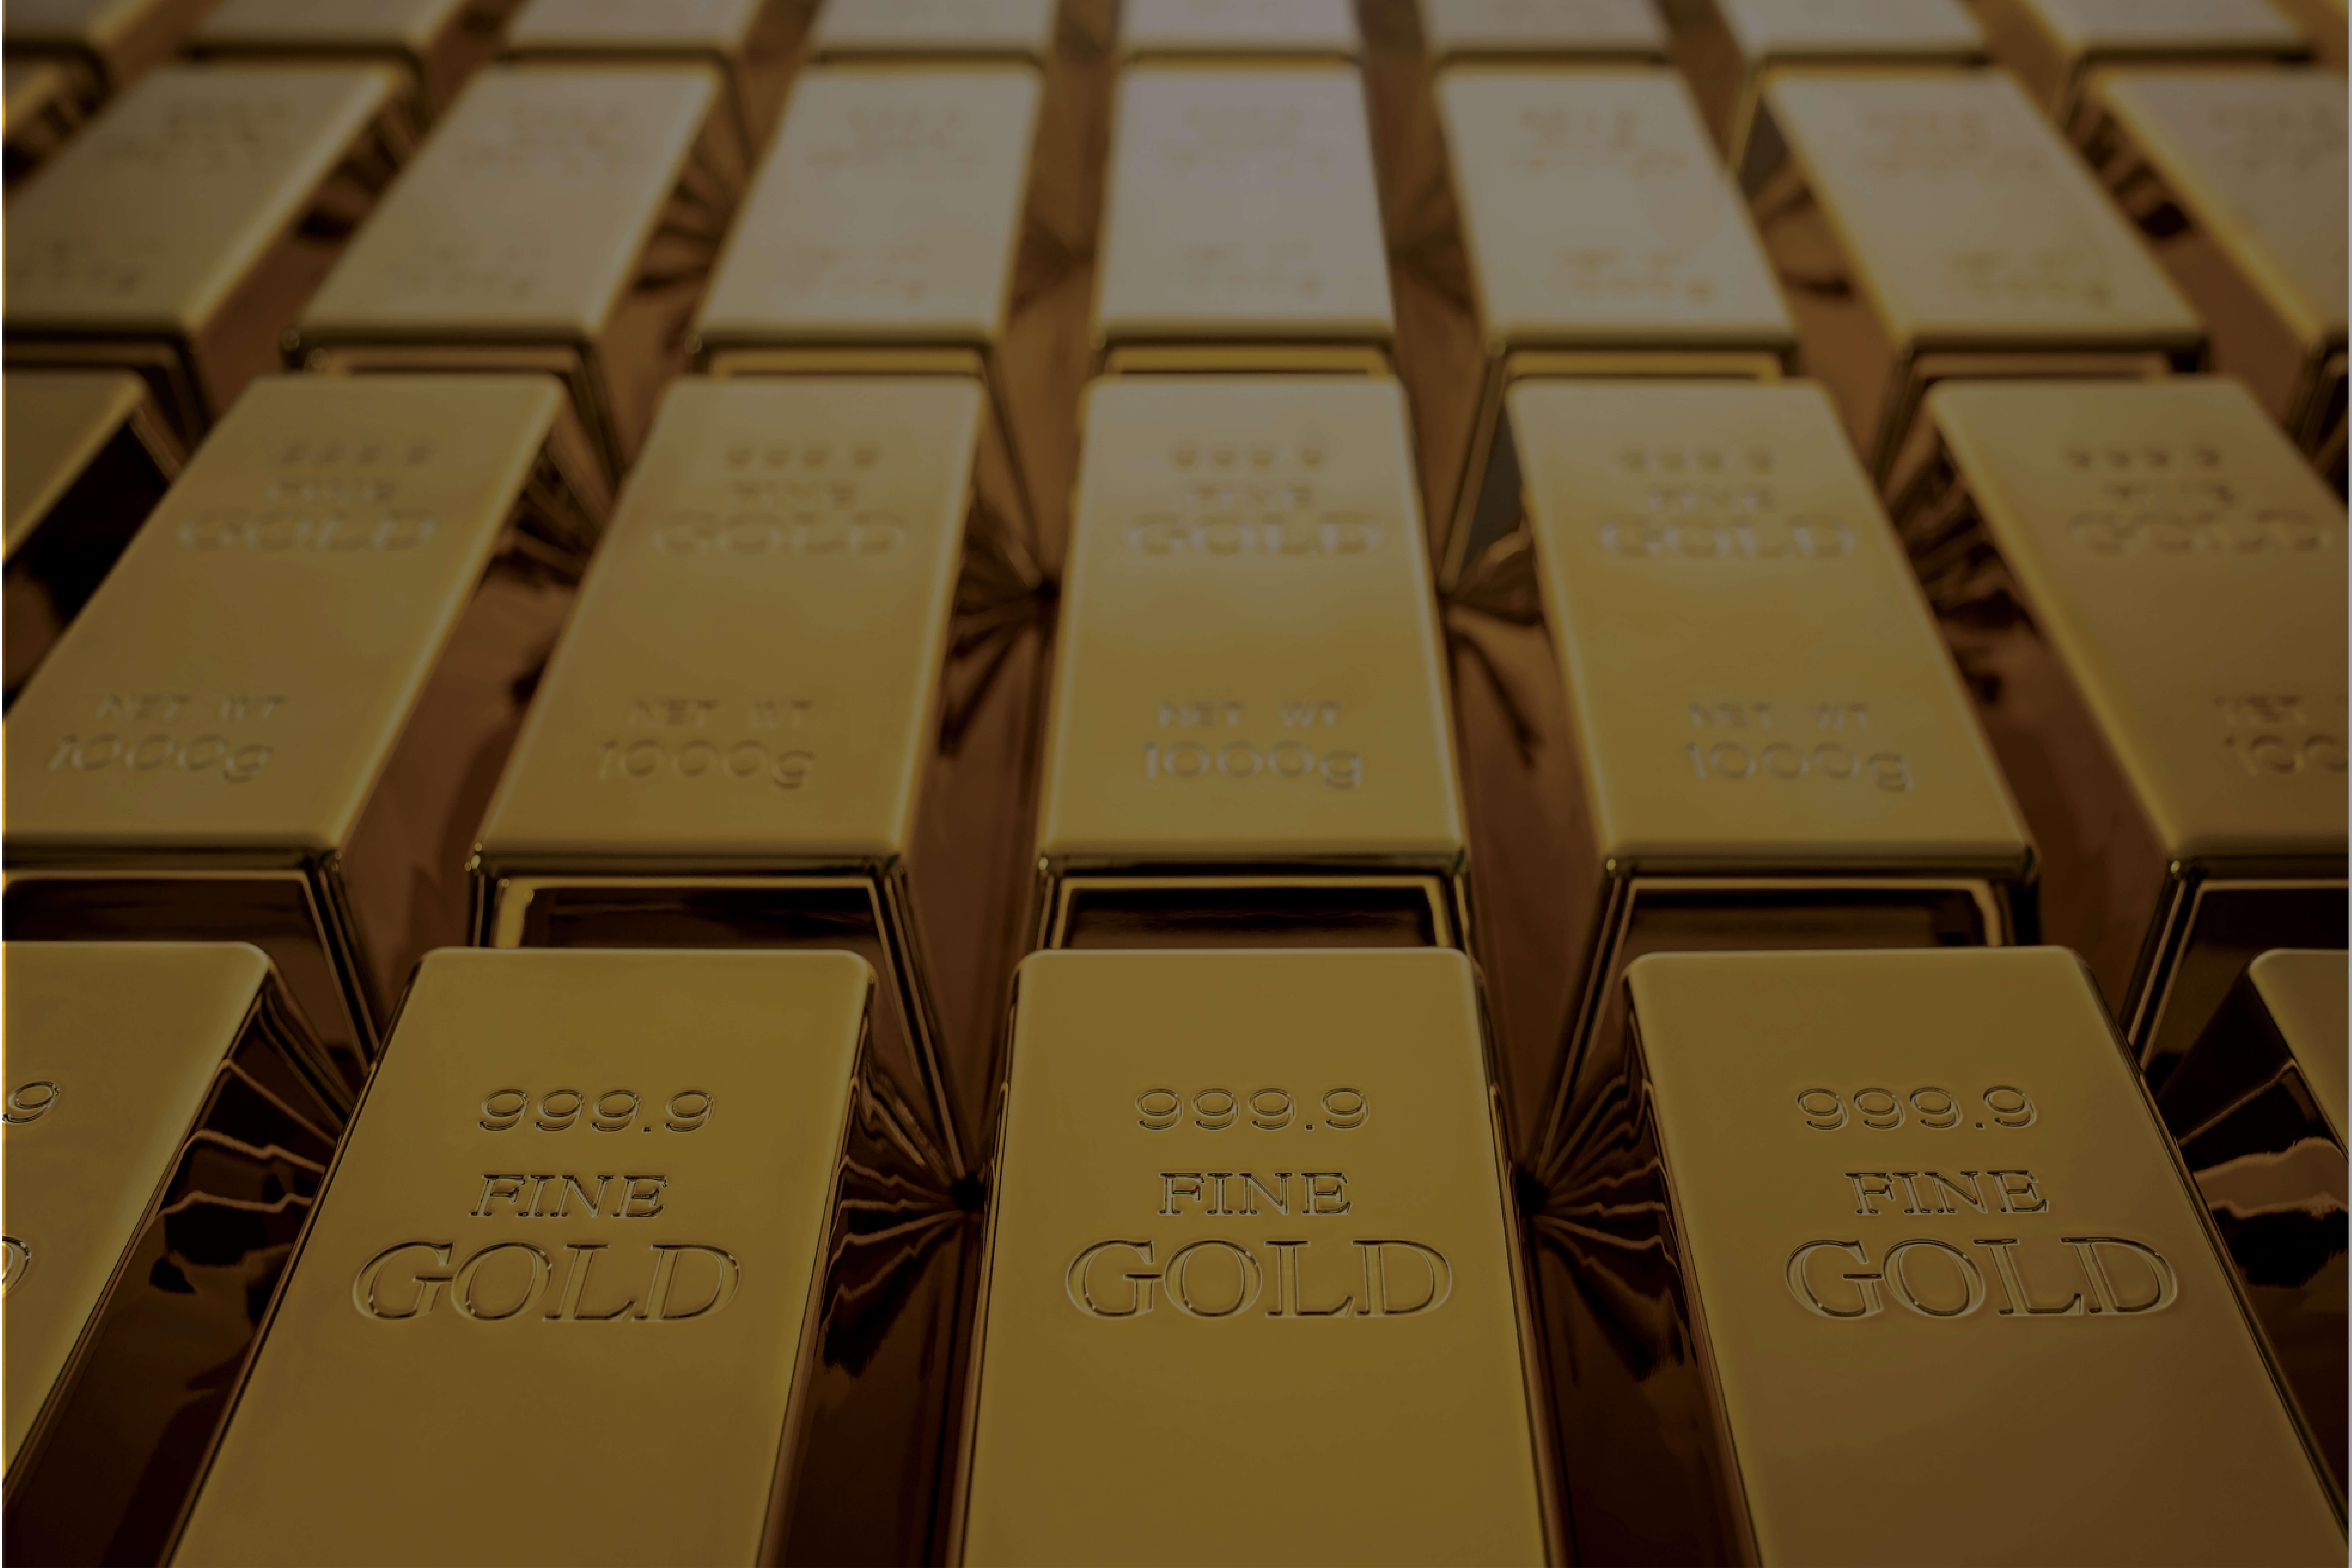 Gold Reserves — The Importance of Gold in Central Bank Reserves